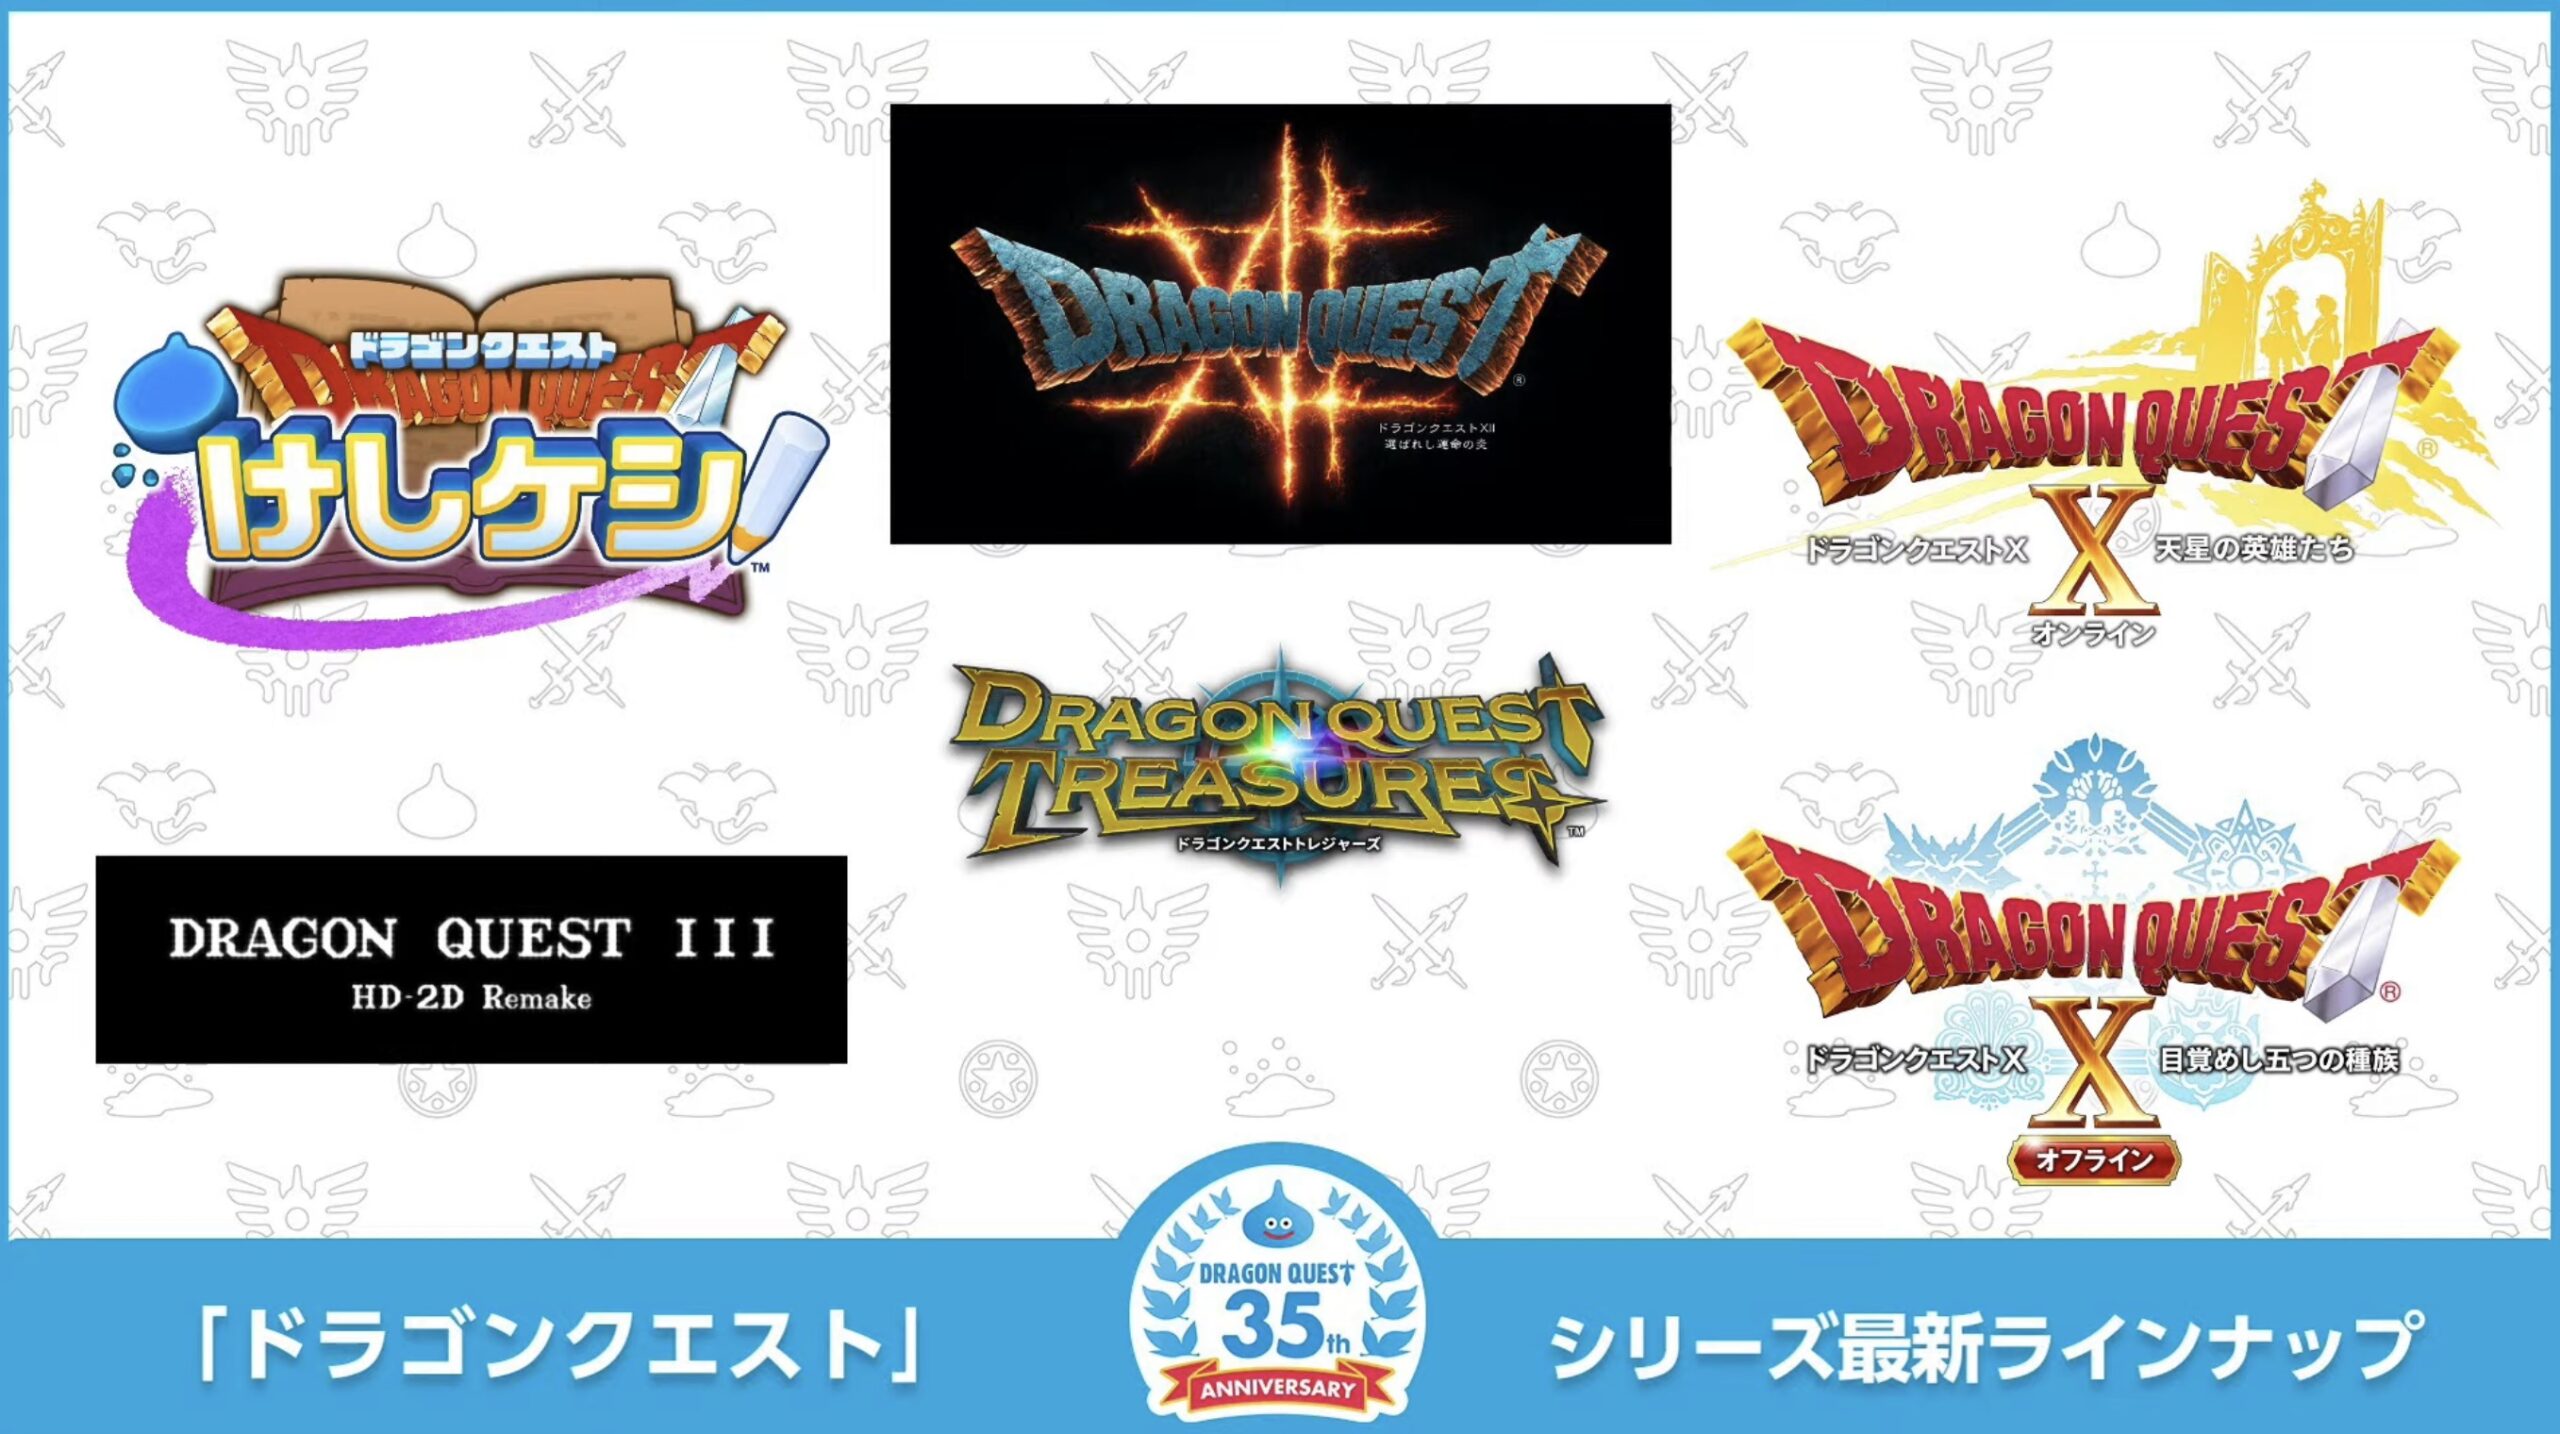 Square Enix releasing special Dragon Quest Switch system in Japan